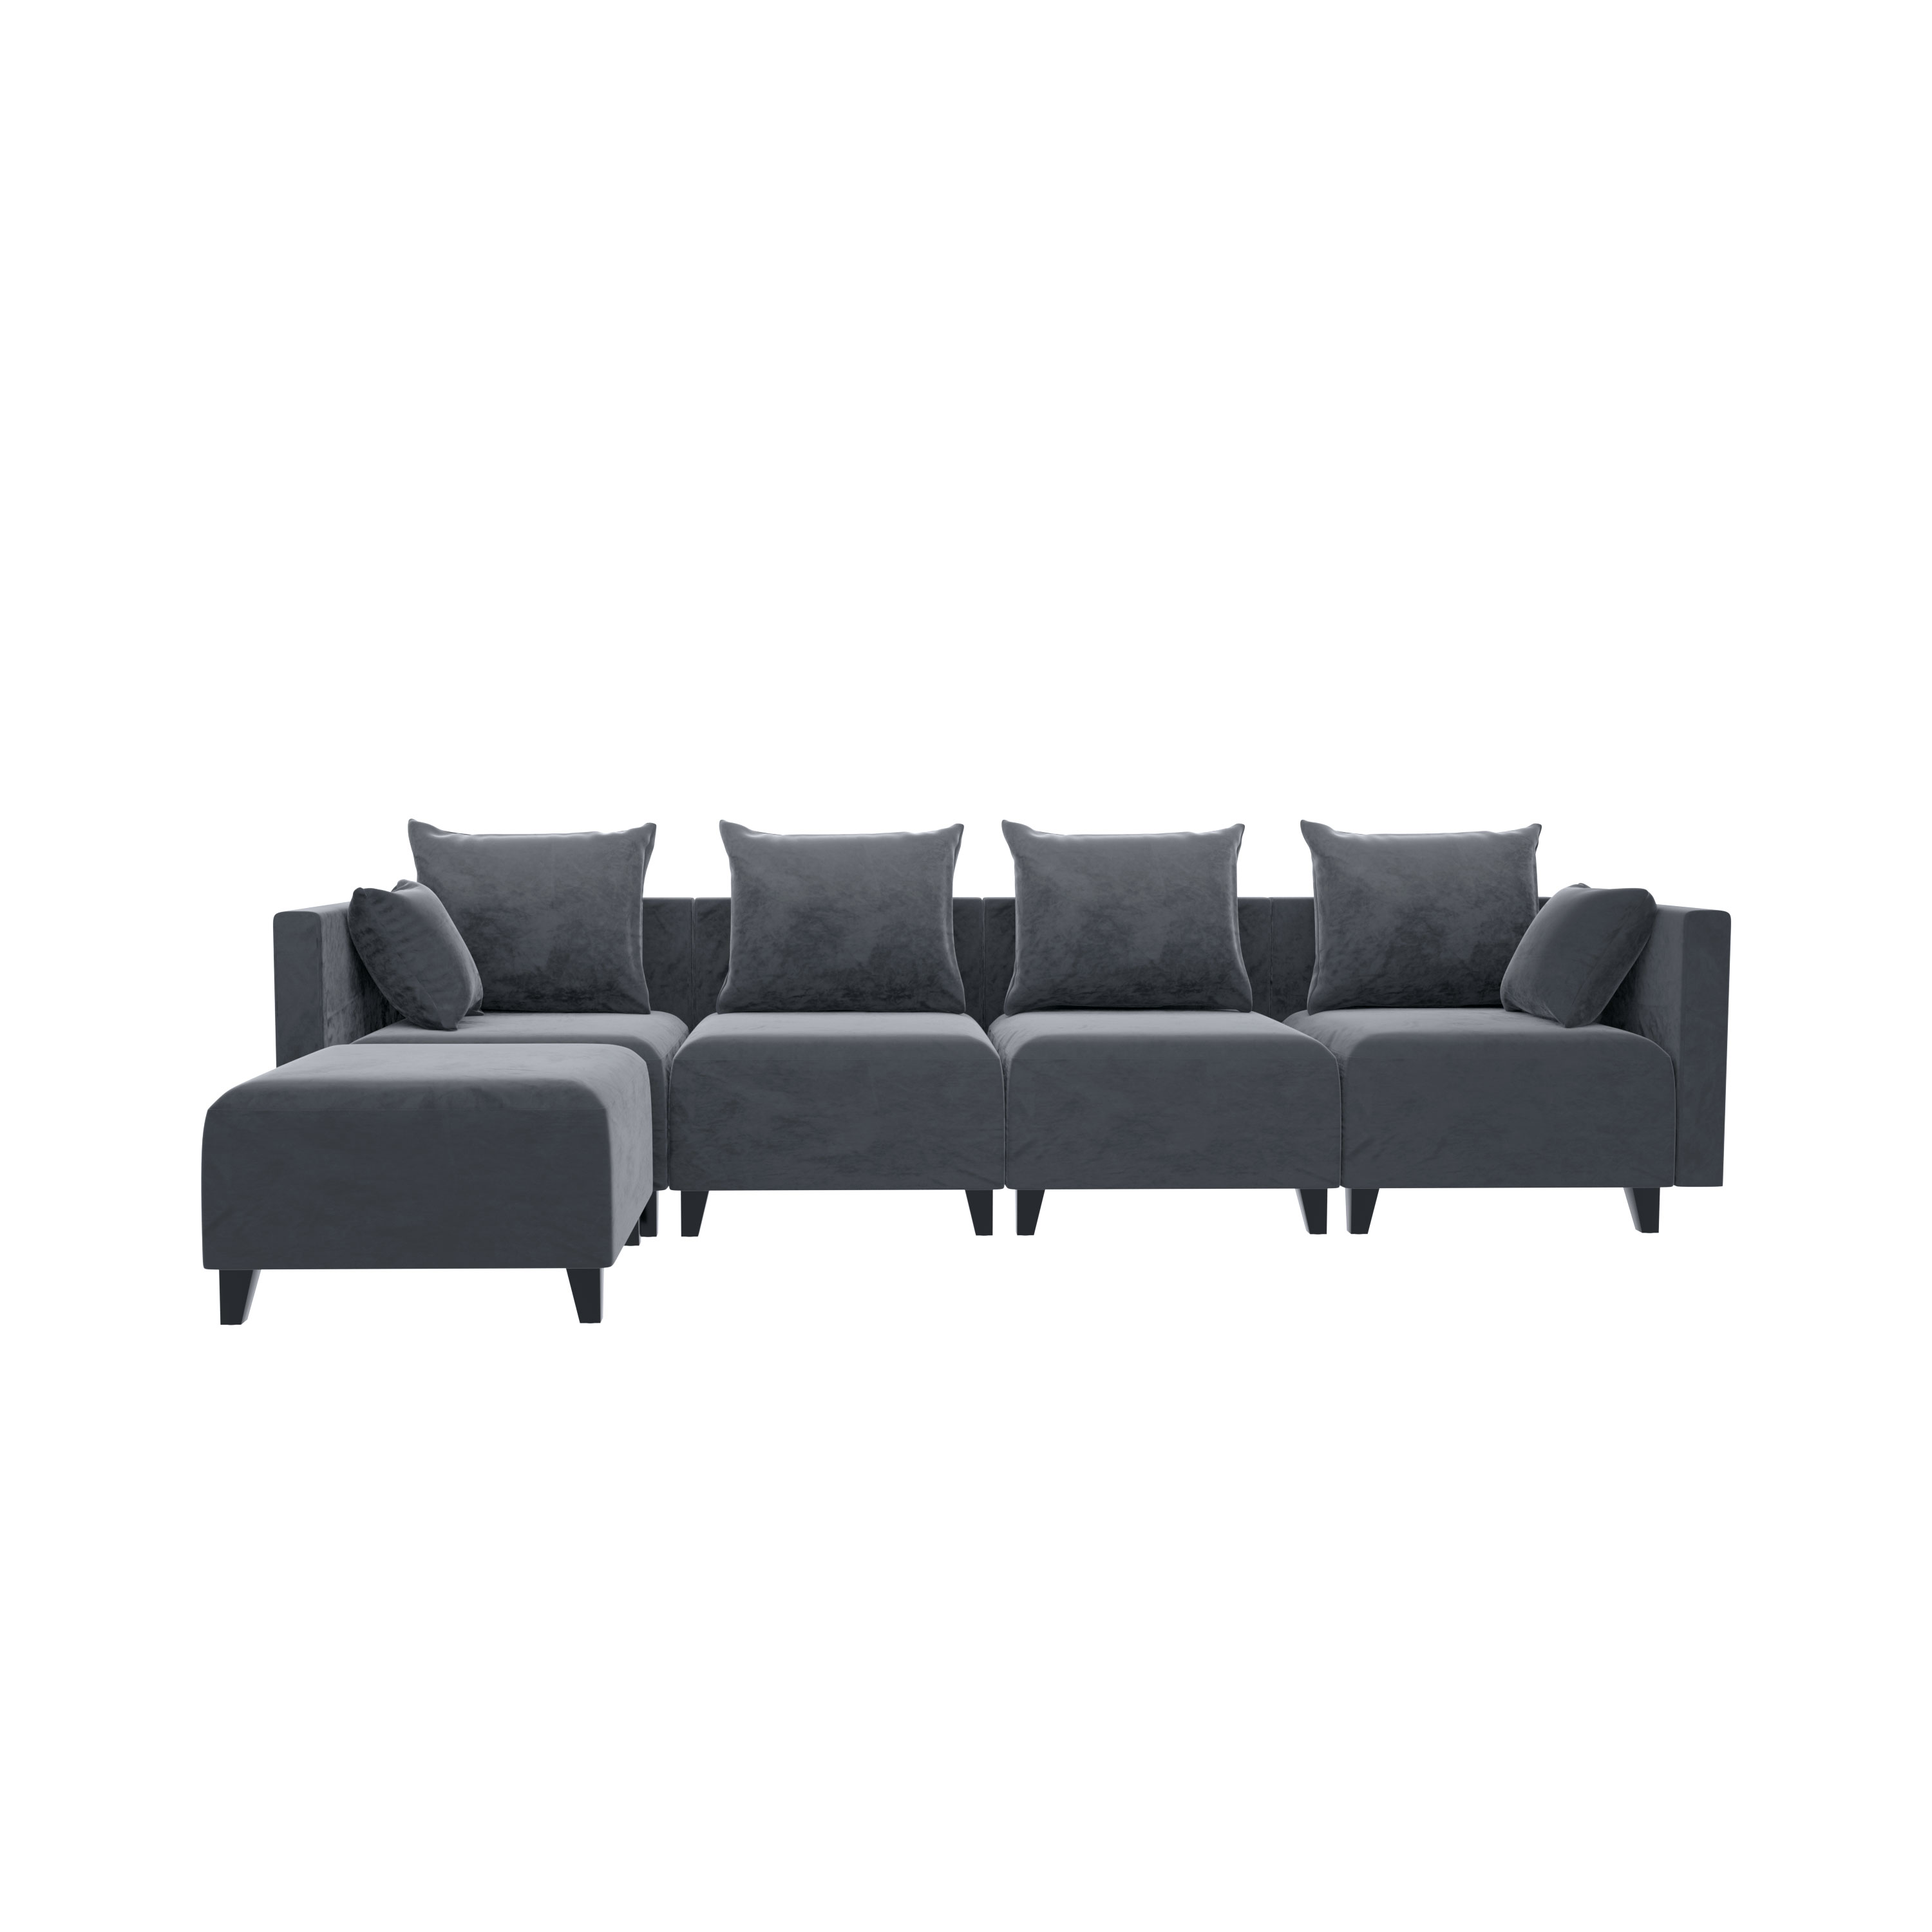 Sectional Sofa L Shape Modular Couch with 6 Pillows for Living Room Grey